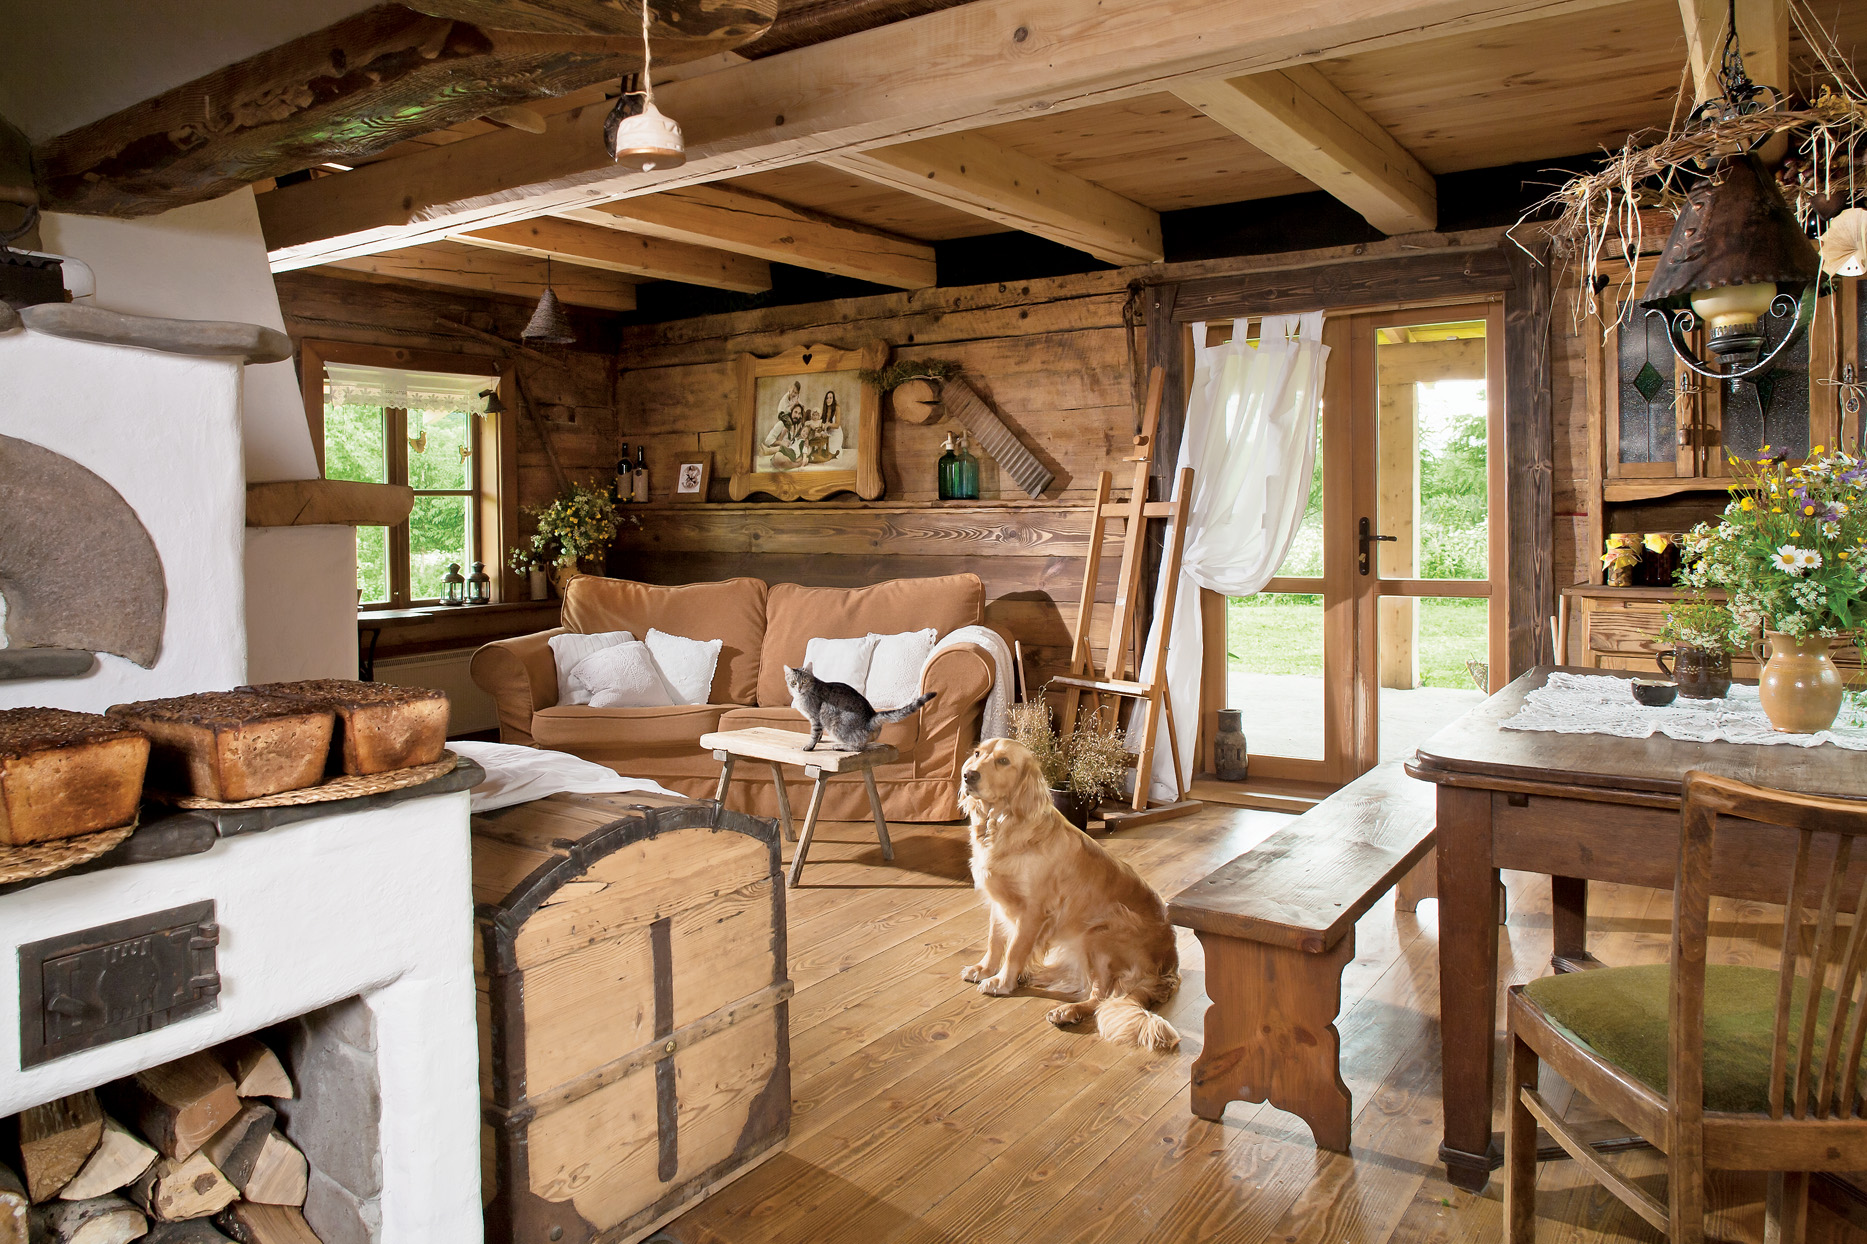 country style living room interior